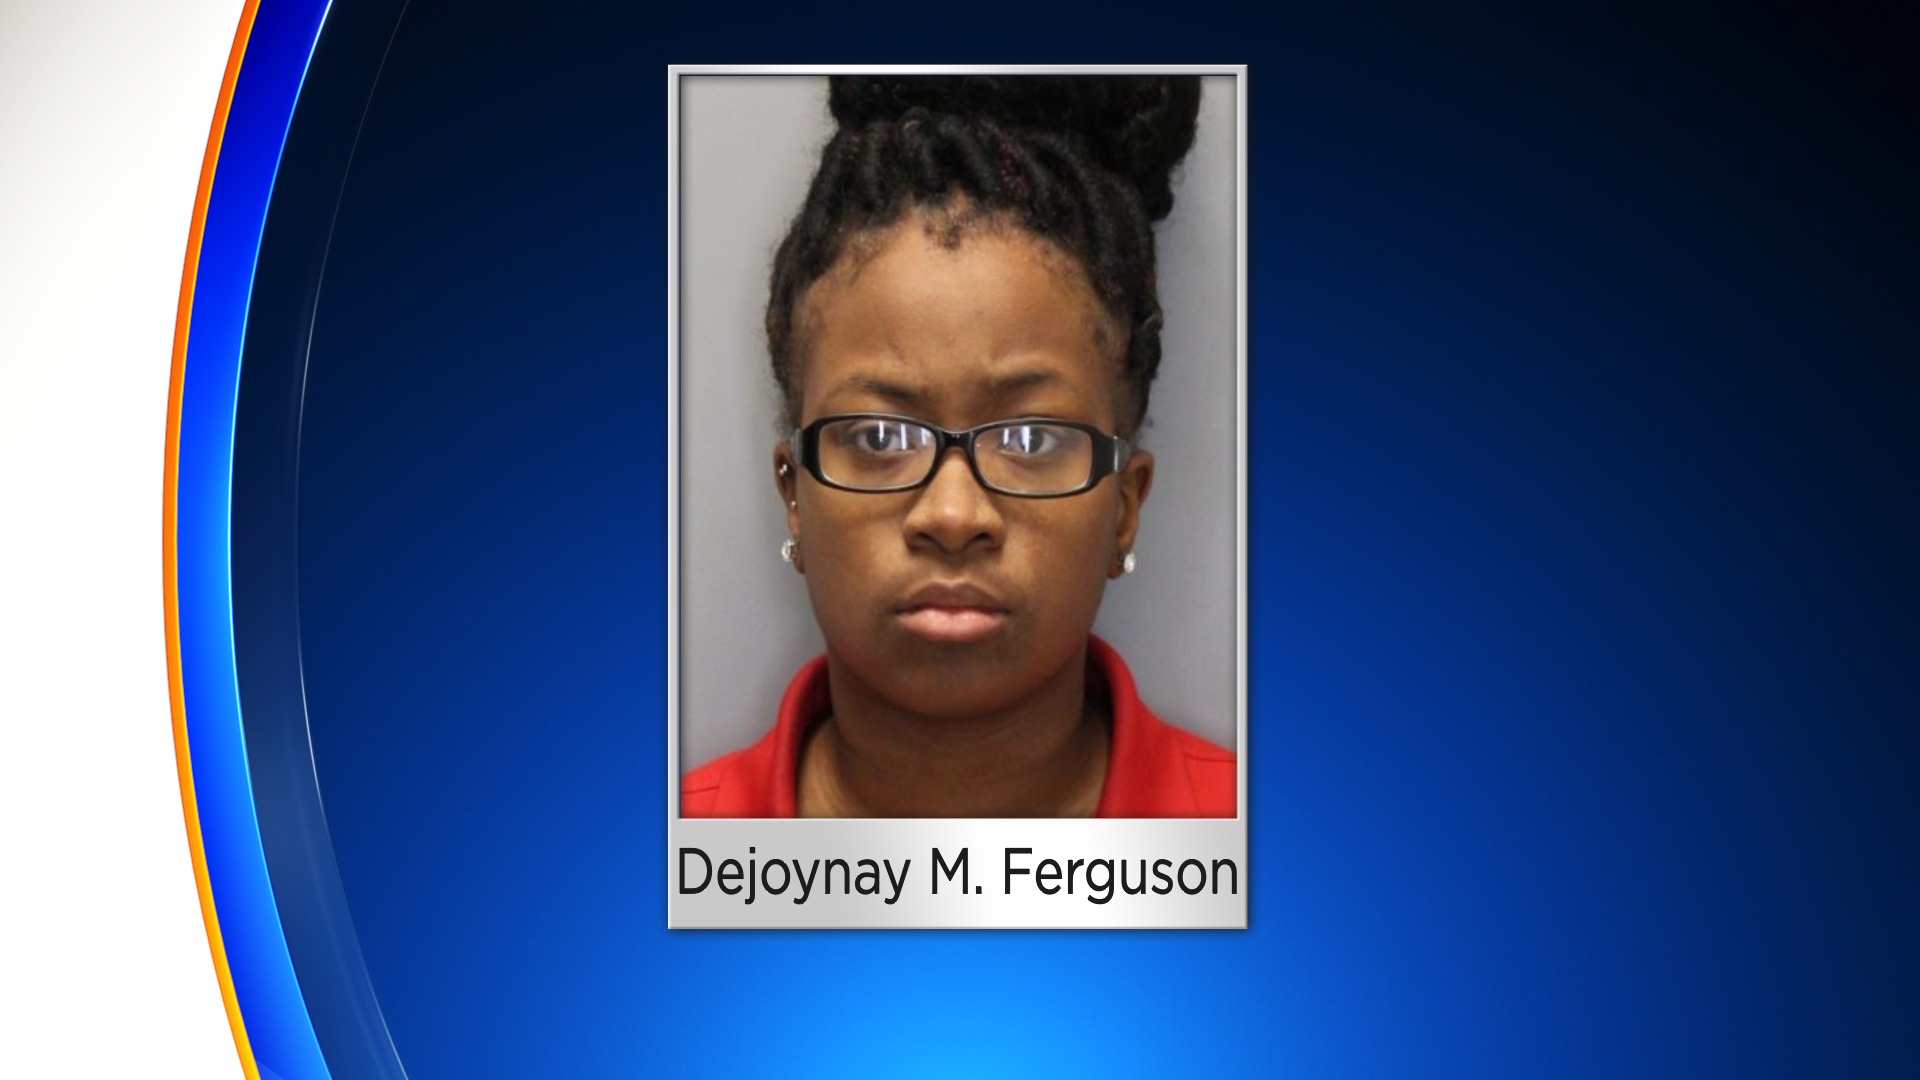 19-Year-Old Delaware Daycare Worker Charged With Murder Of 4-Month-Old Baby